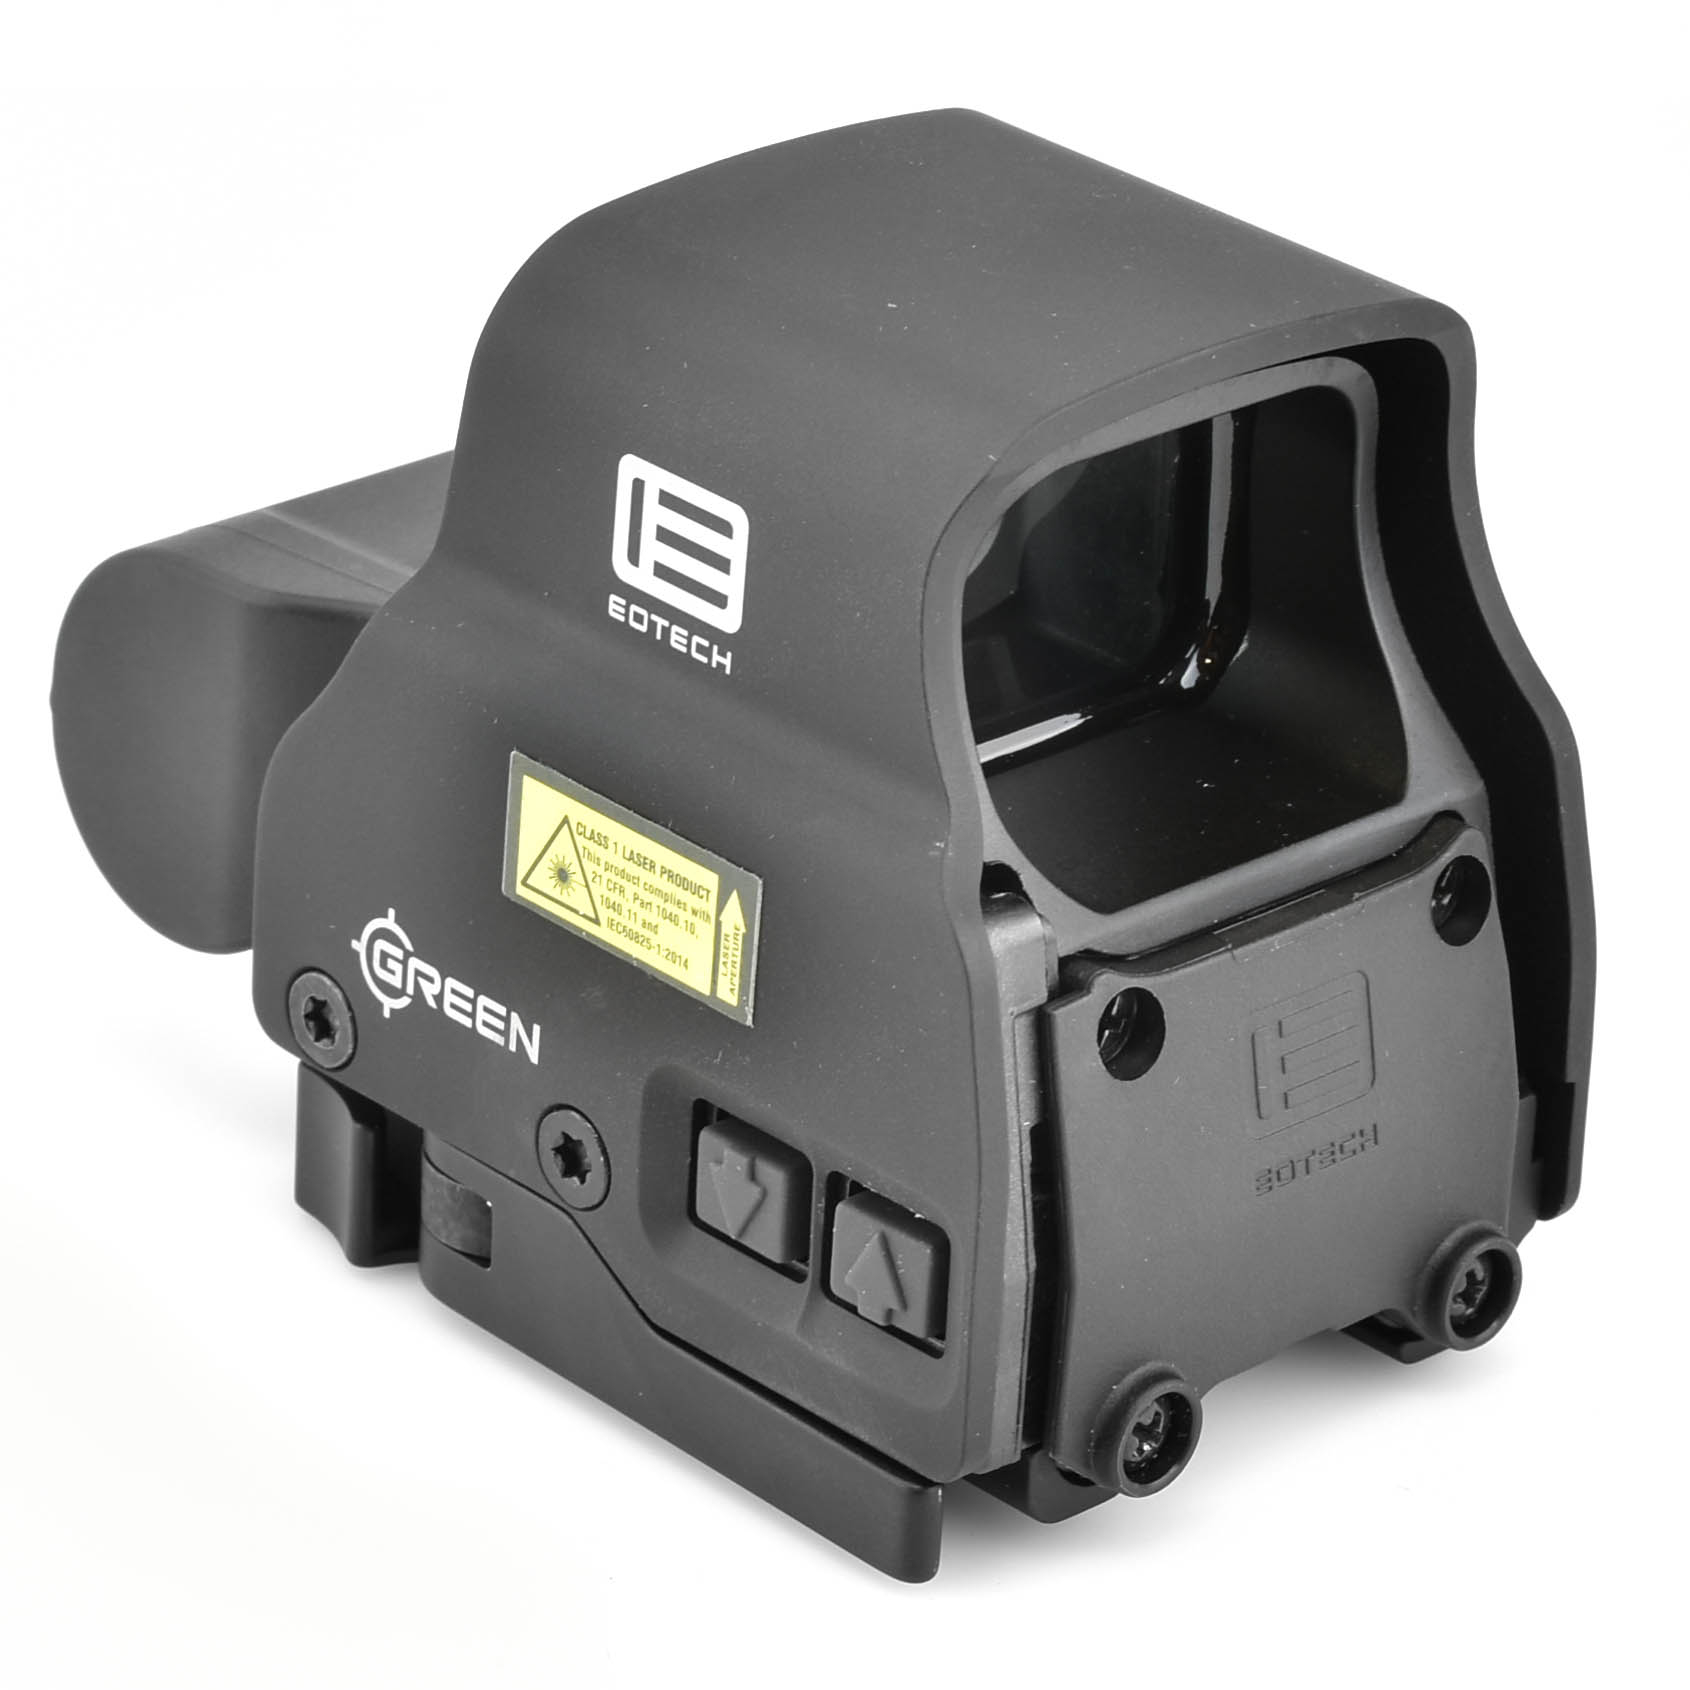 holographic red dot sight